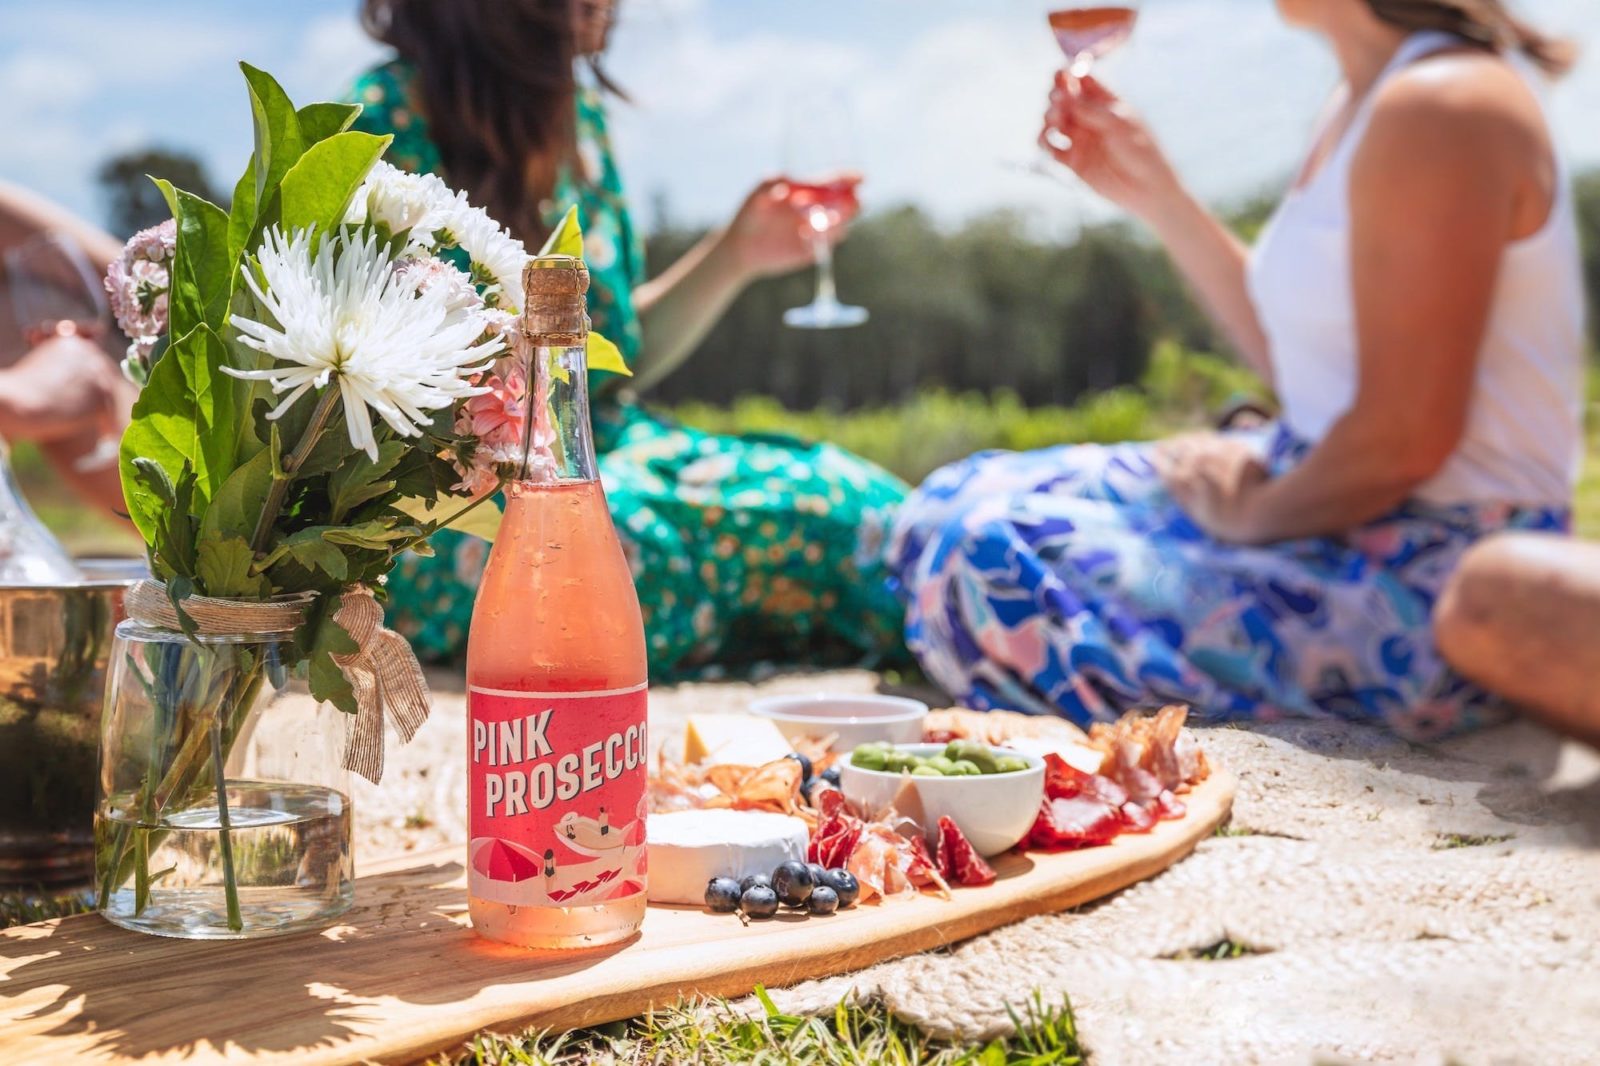 Pink Prosecco and picnic